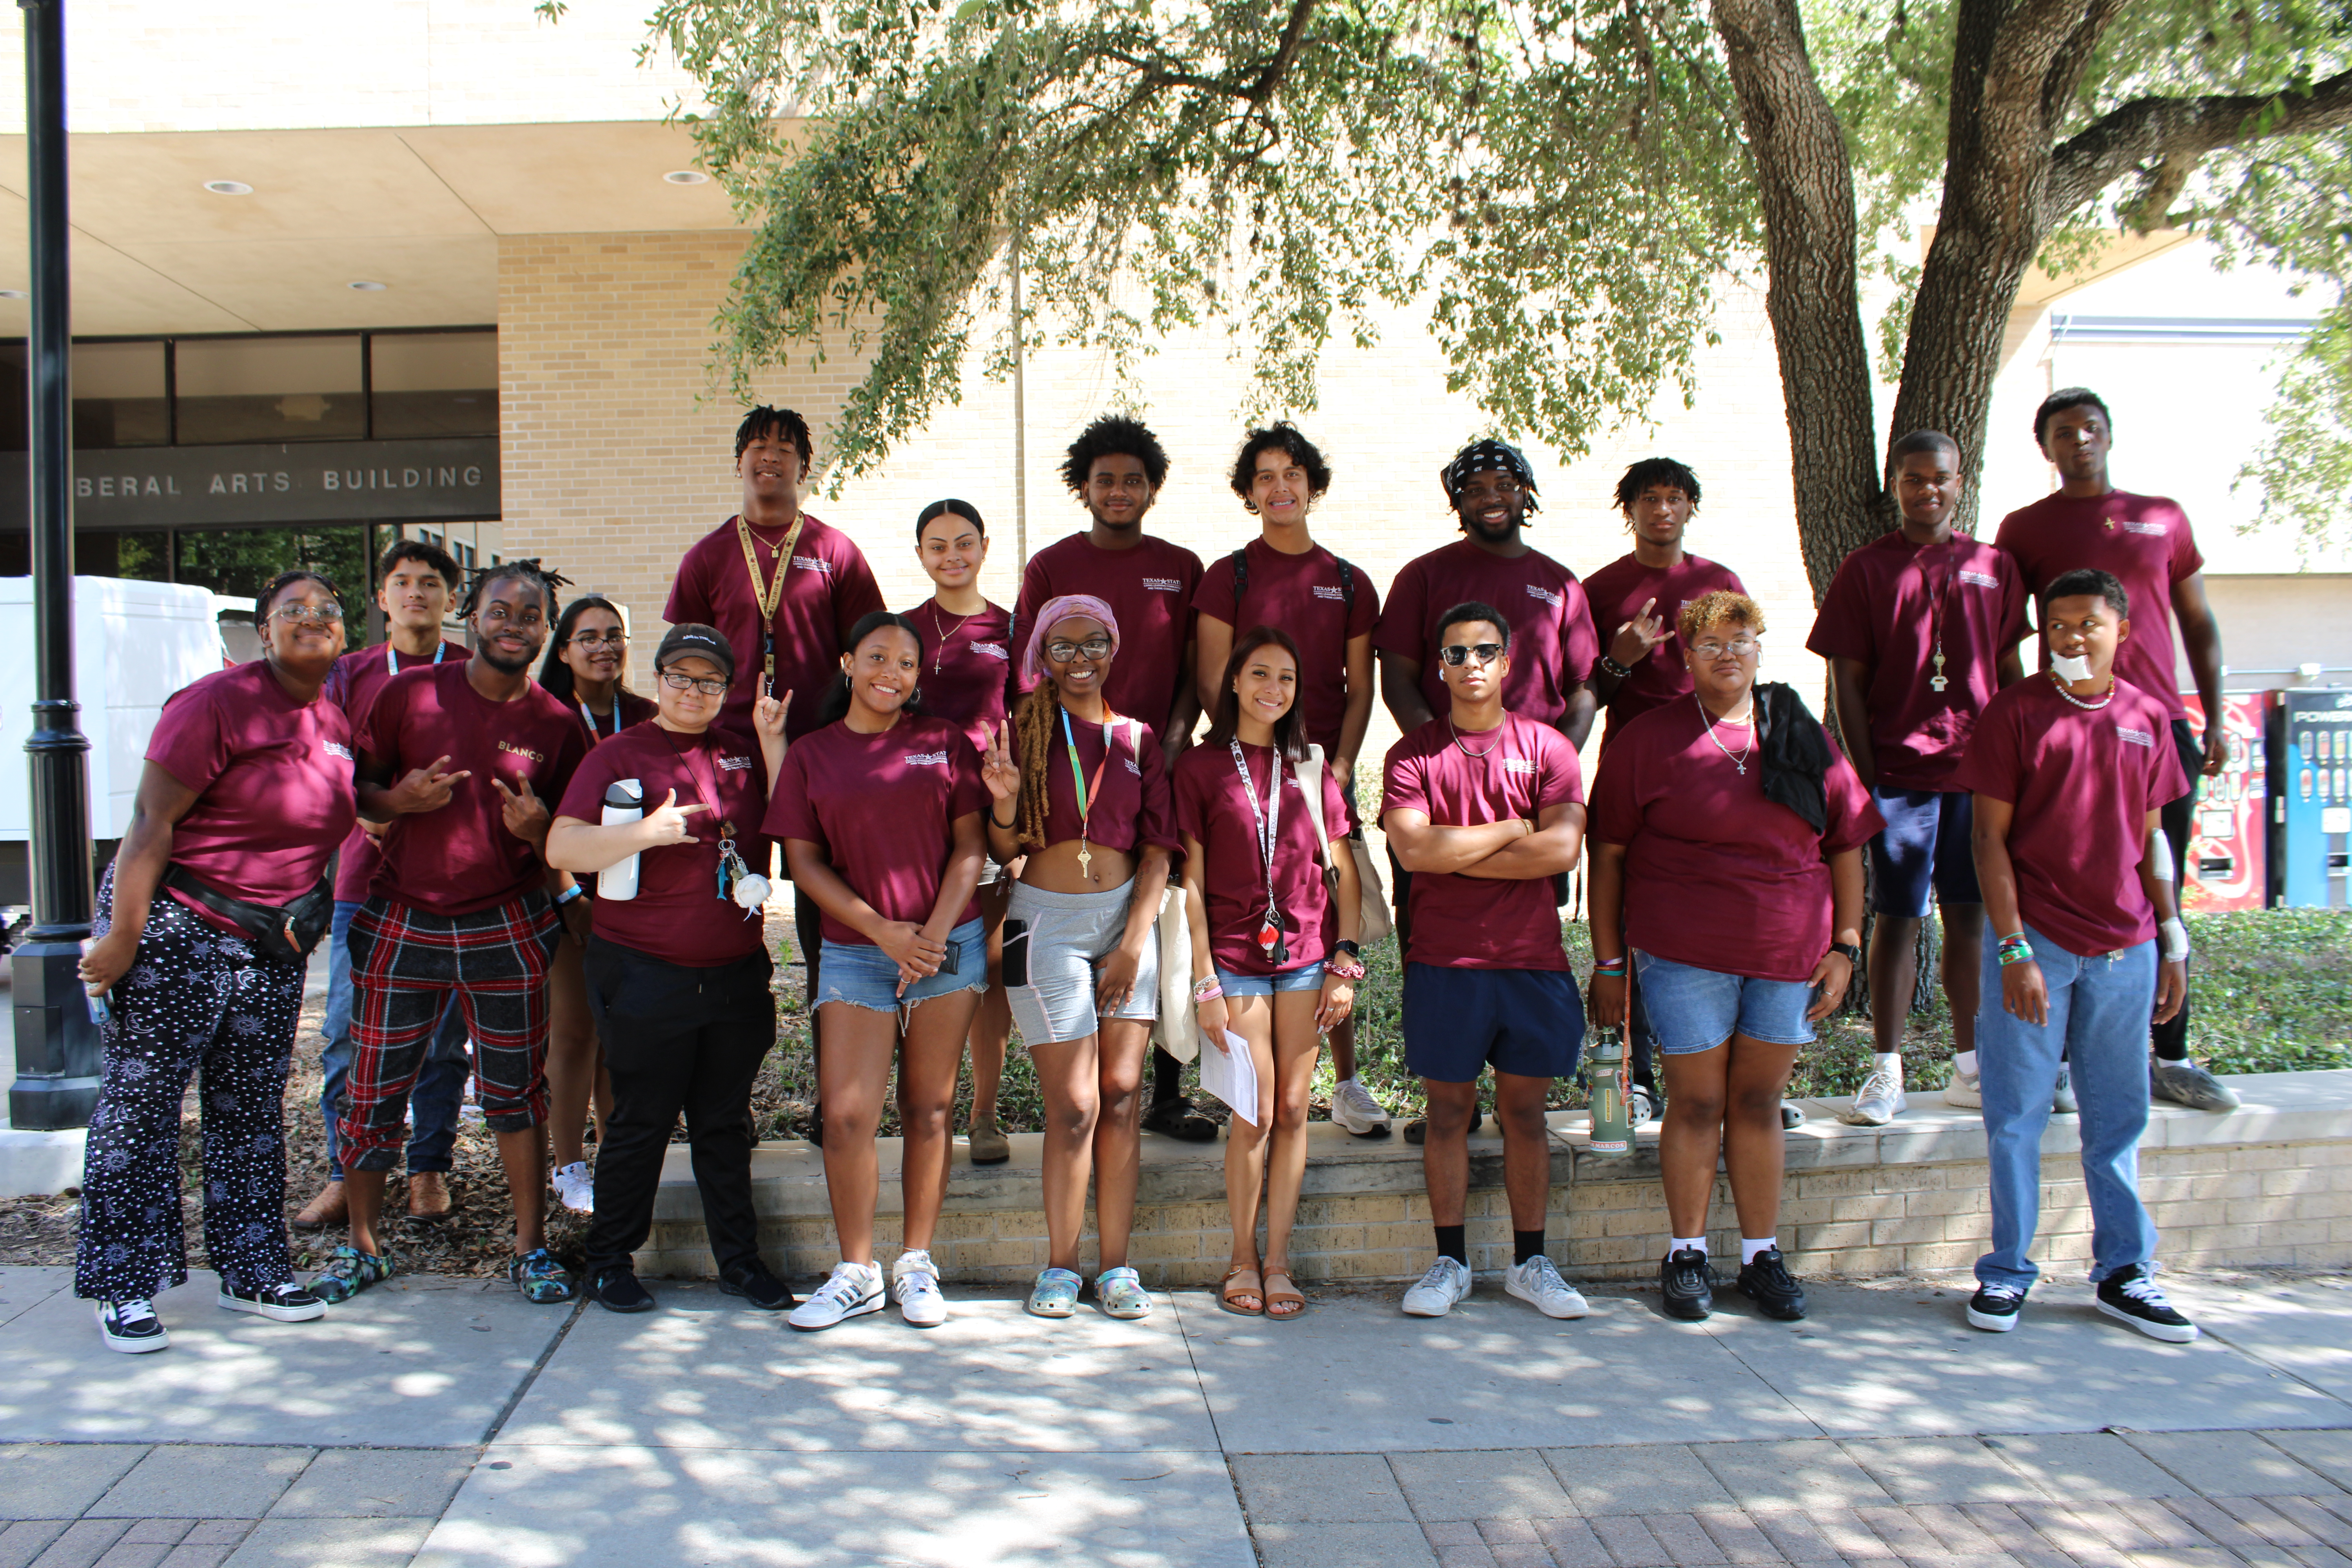 Group of people in matching maroon shirts